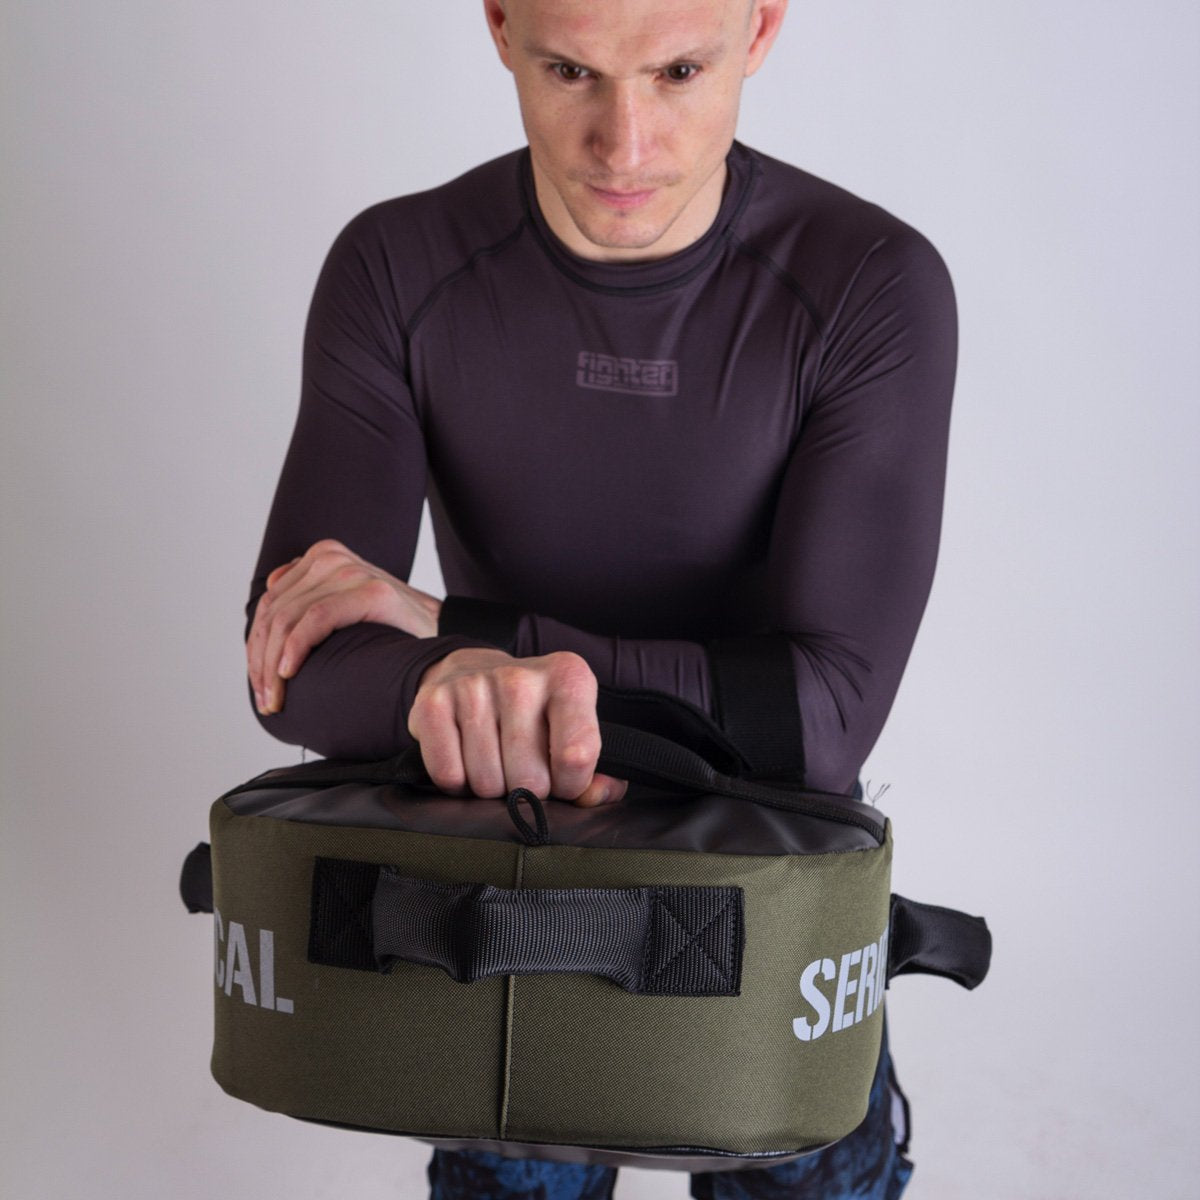 Fighter Kicking Shield - MULTI GRIP - TACTICAL SERIES - Green